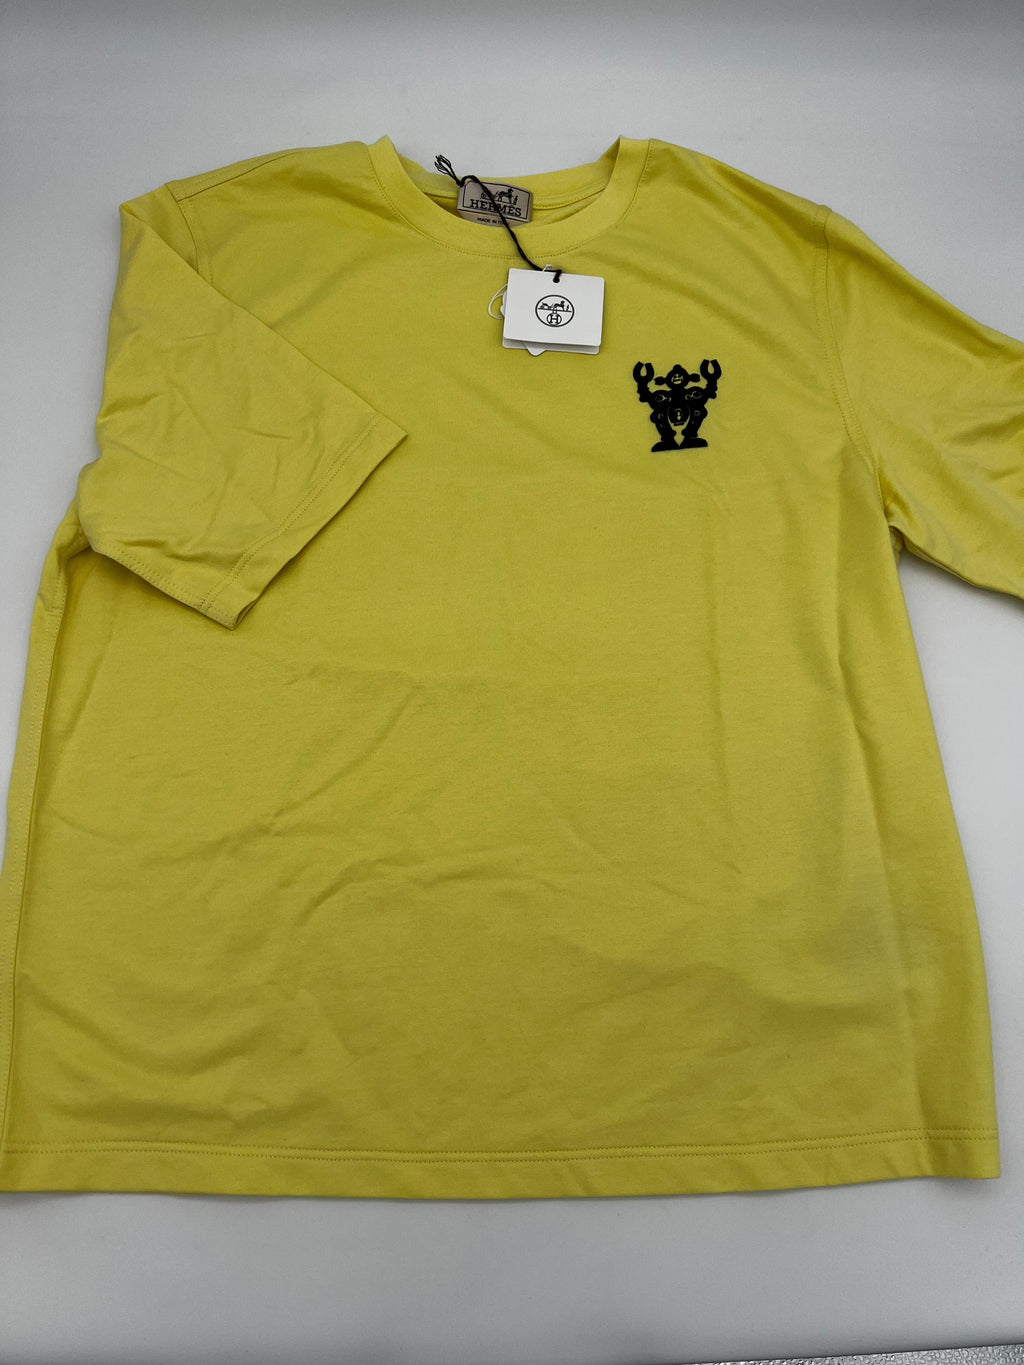 Hermes Mini Patch Mr F T Shirt in Limonade Size Large UIC1005 ...